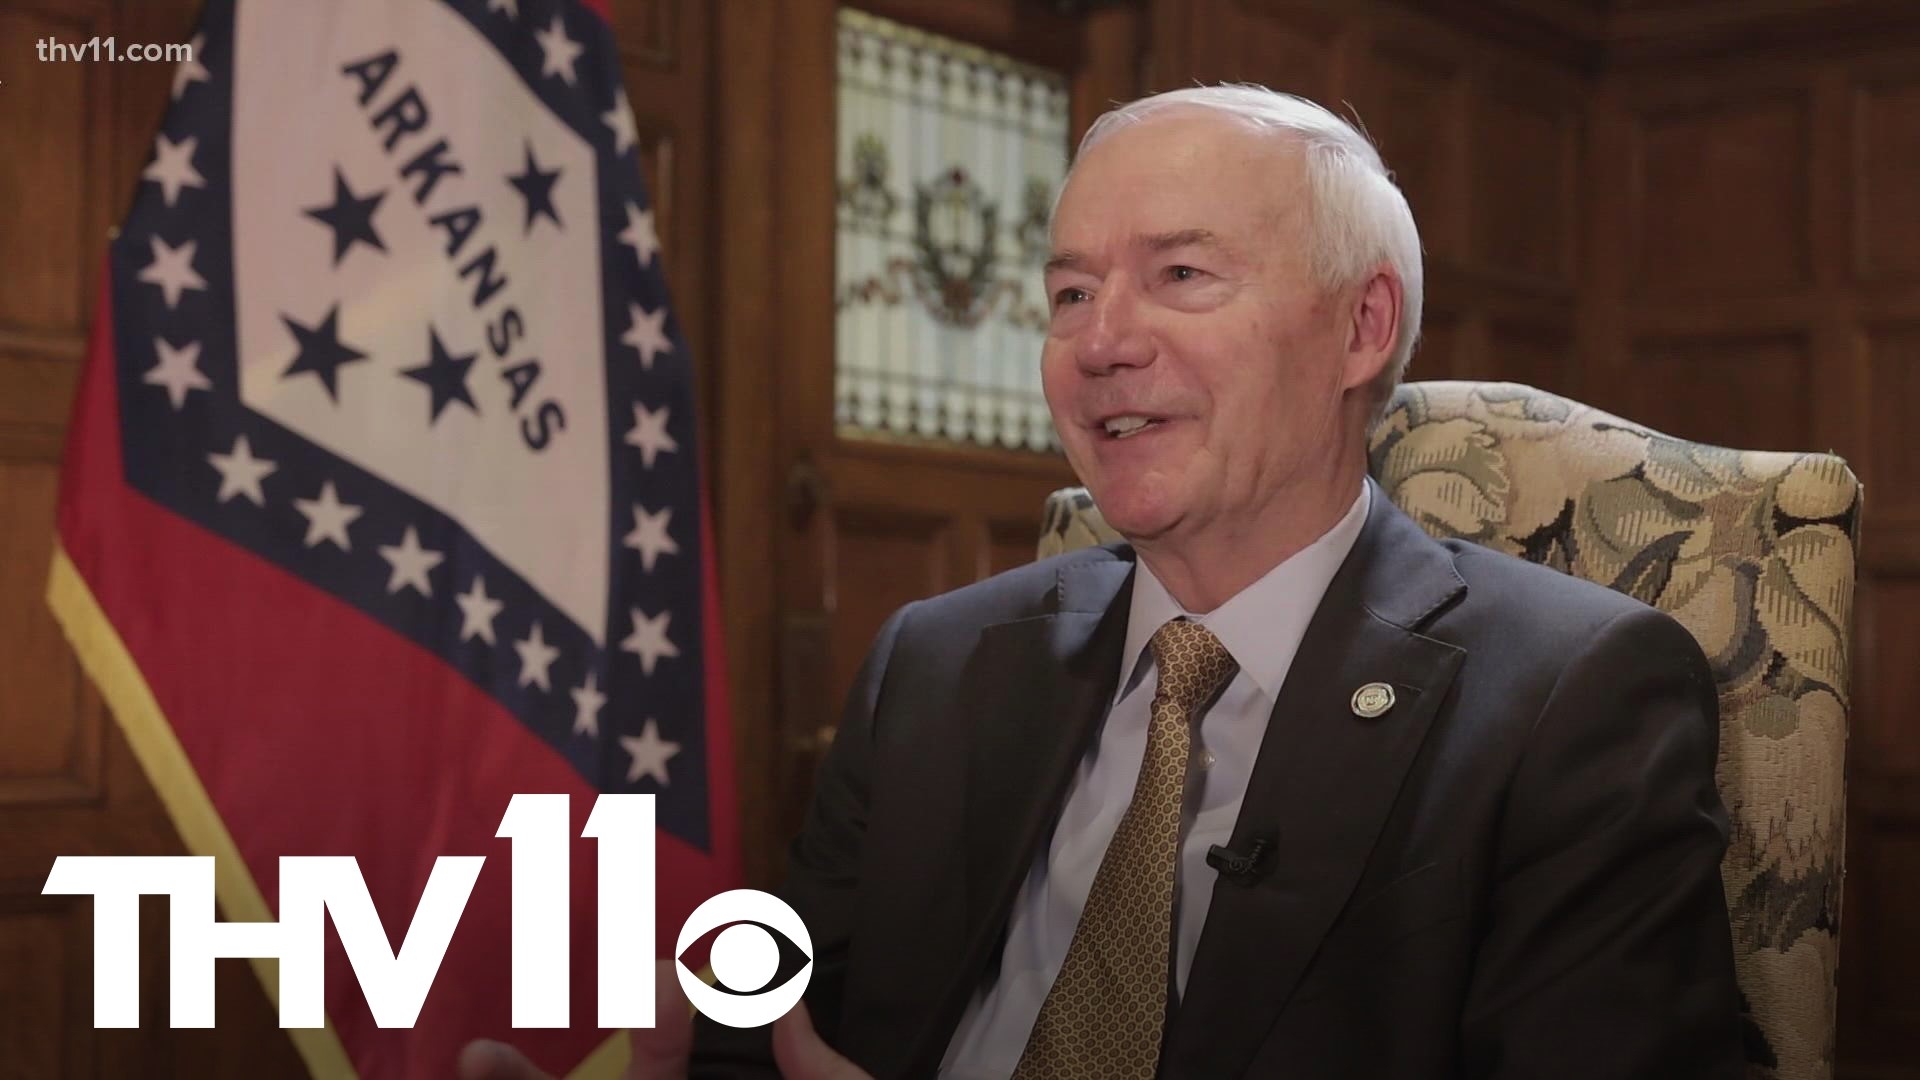 Governor Asa Hutchinson spoke out and referred to the possibility of another Donald Trump presidential nomination as the worst scenario for Republicans in 2024.